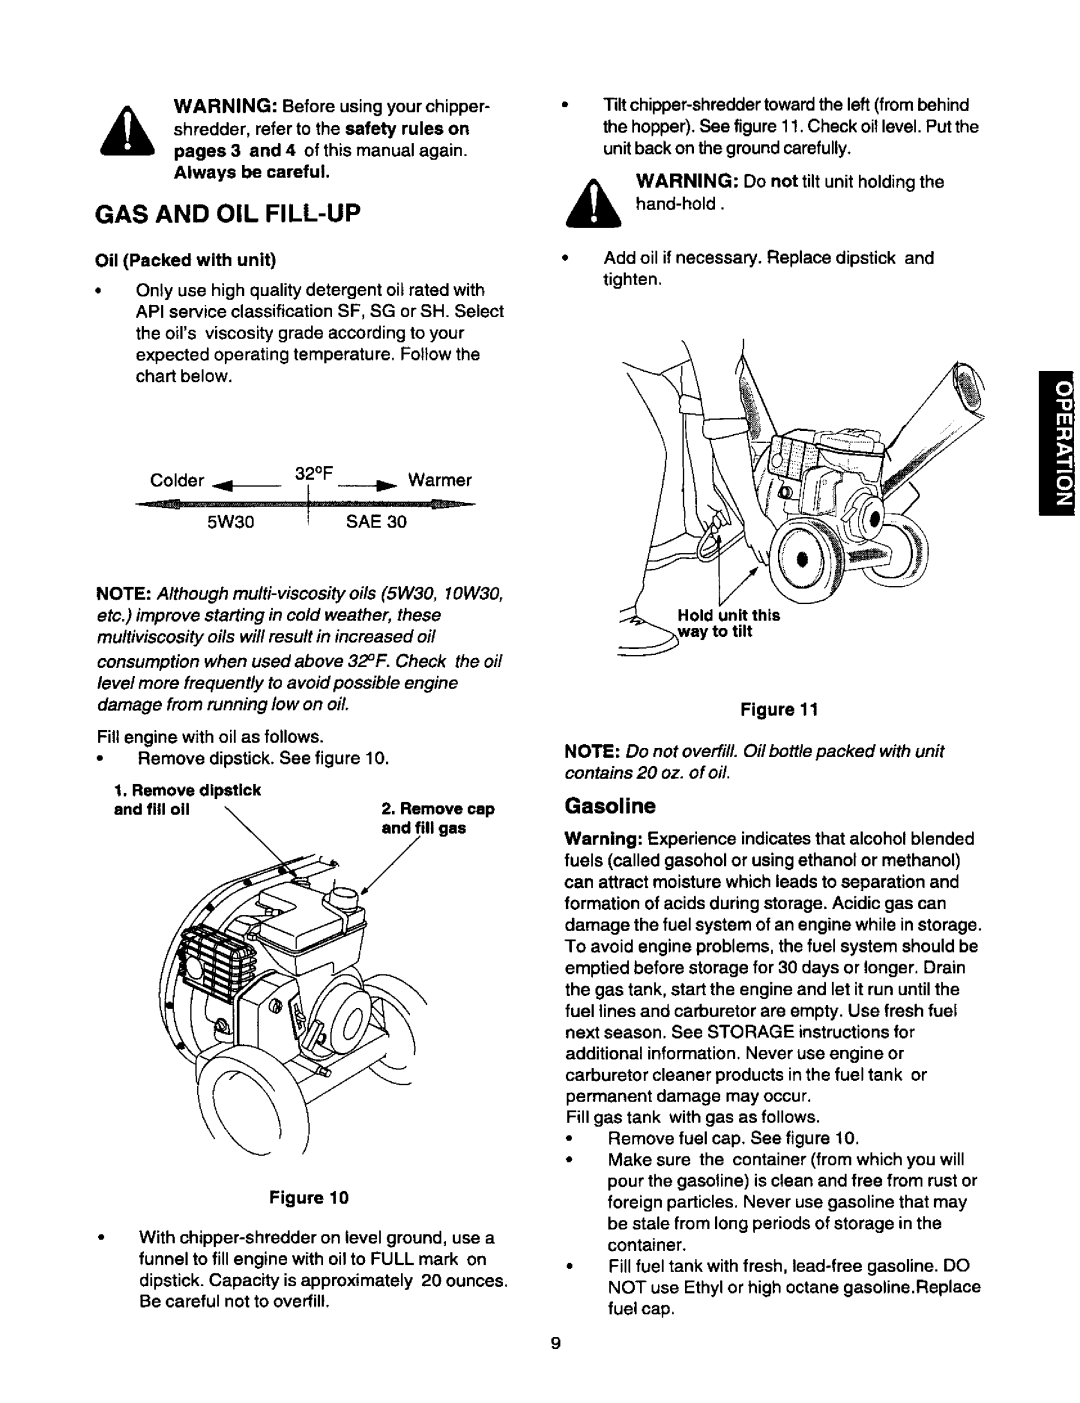 Craftsman 247.775870 owner manual Gas And Oil Fill-Up, Gasoline, hand-hold, WARNING: Do not tilt unit holding the 